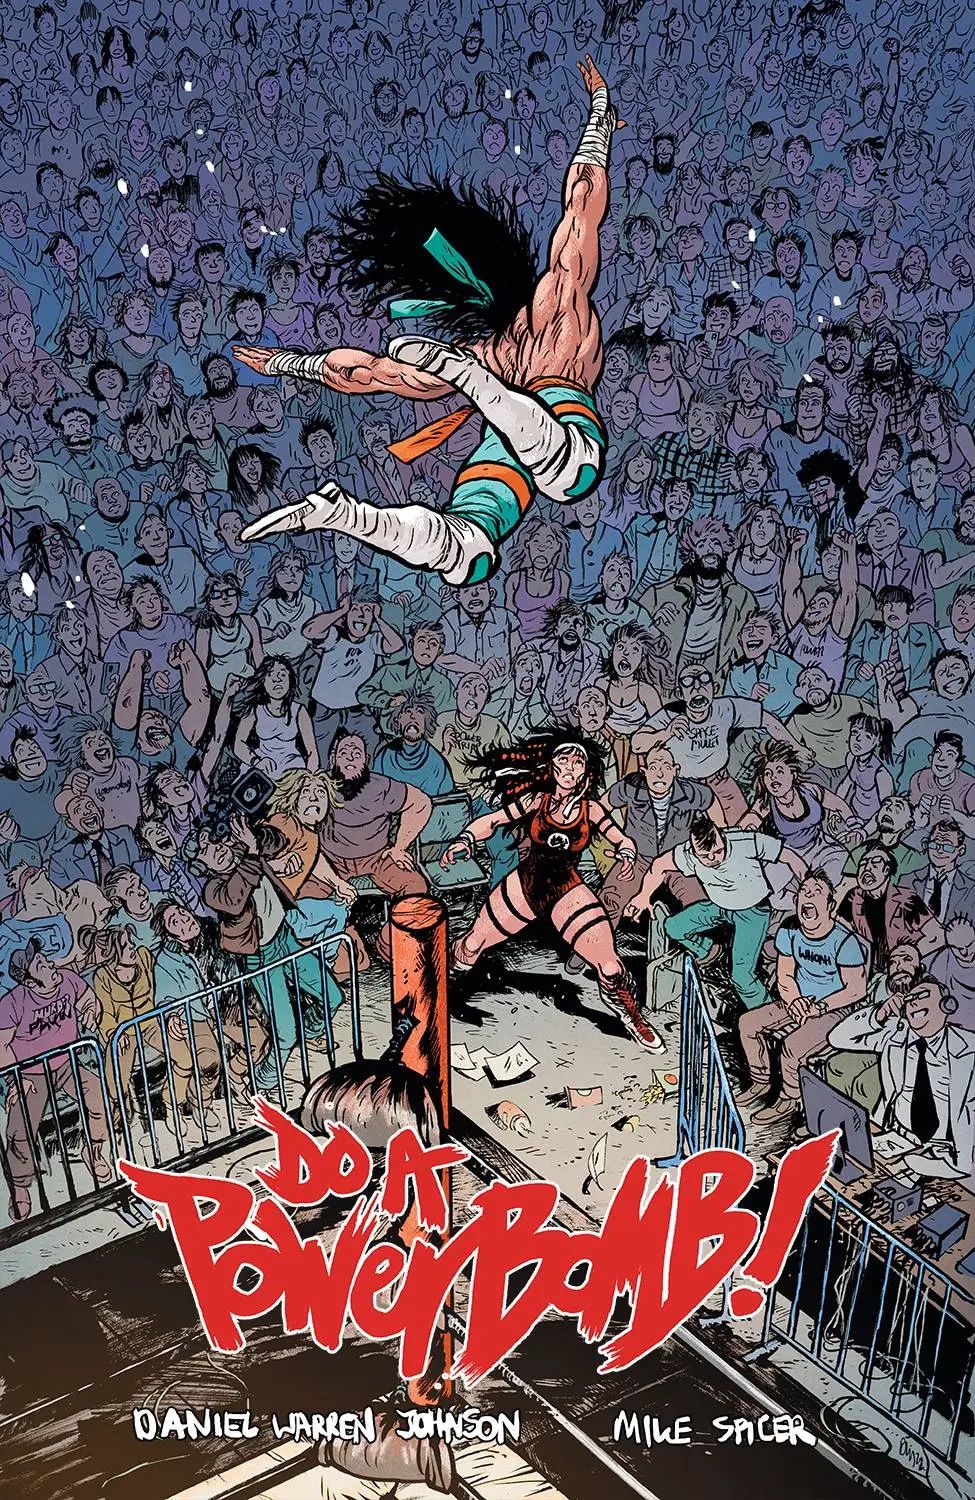 A shirtless professional wrestler does a flying leap at a woman wrestler with wild hair, as a huge crowd looks on in excitement on the cover of Do a Powerbomb!